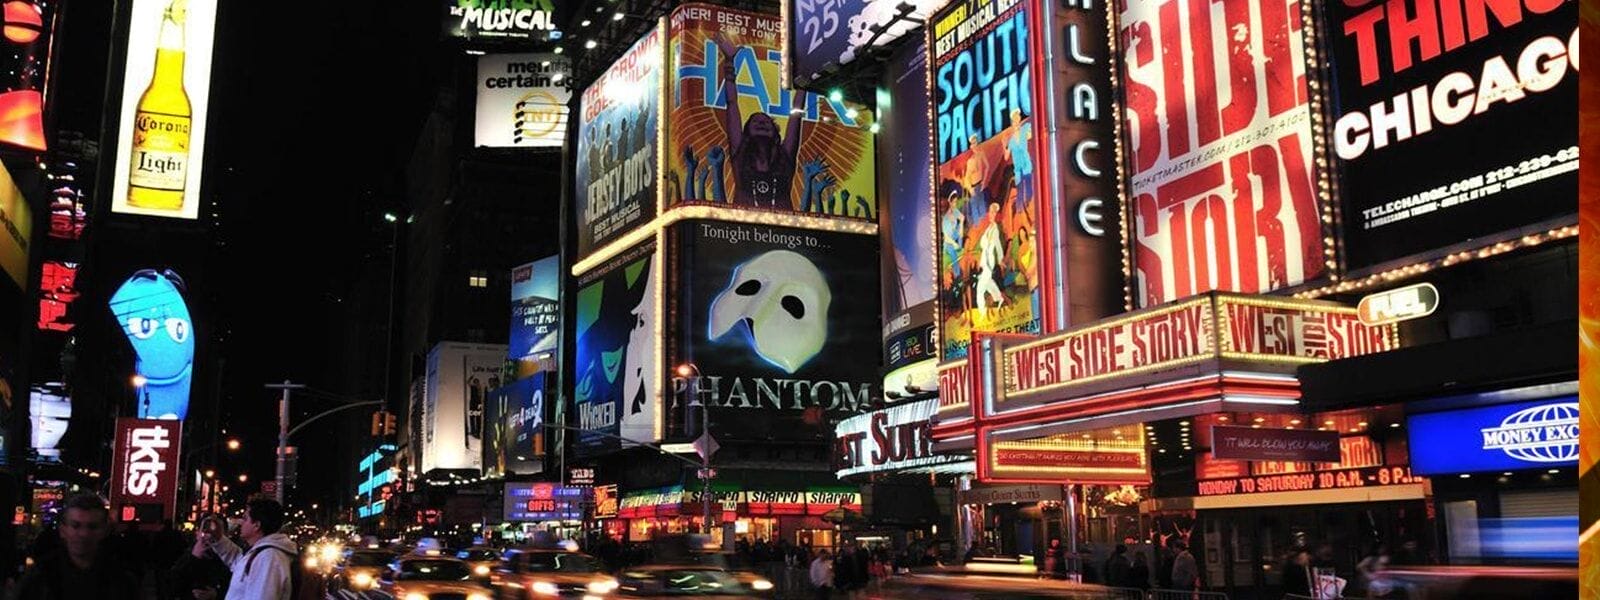 Times Square where advertisements for shows on Broadway are displayed